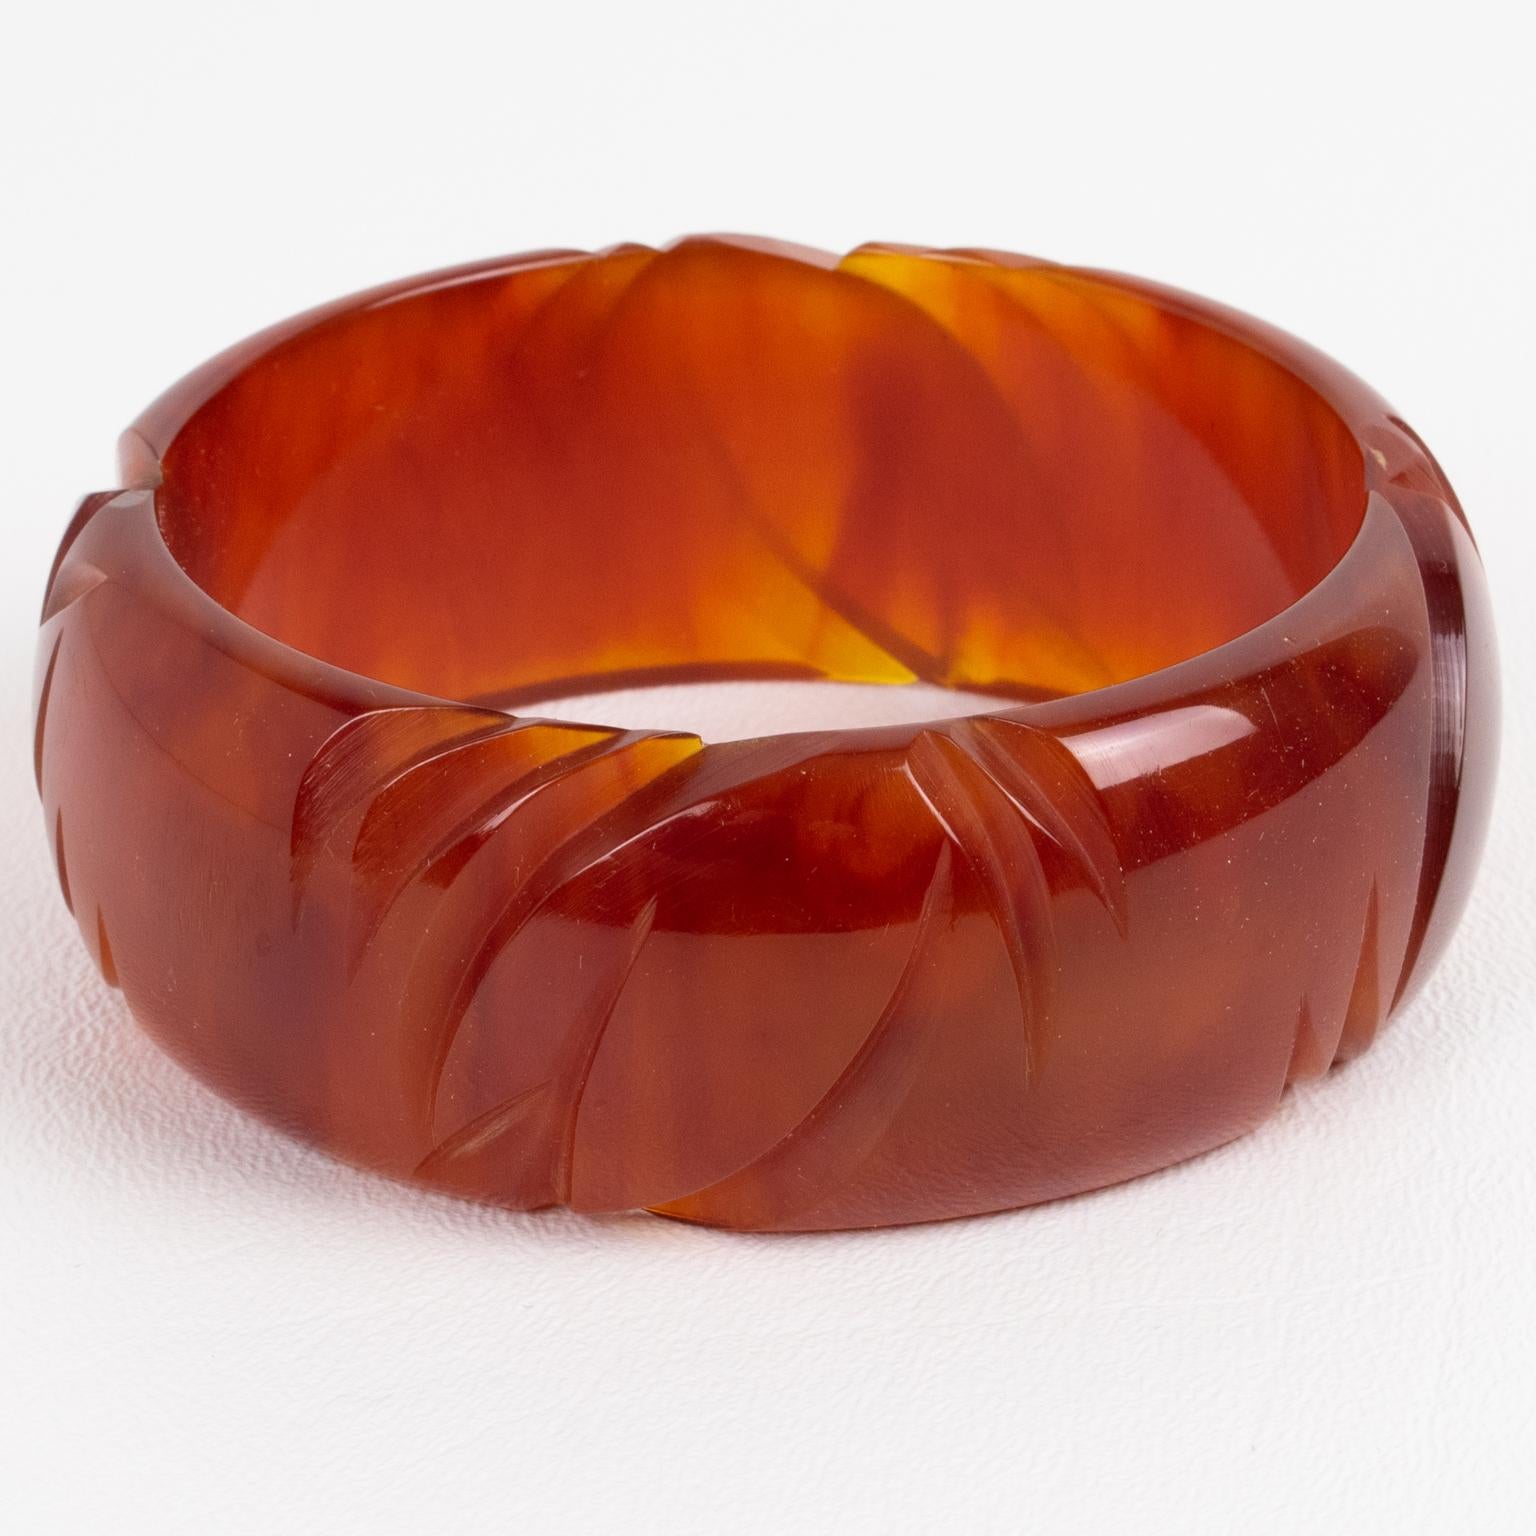 This is a stunning caramel amber marble Bakelite carved bracelet bangle. It features a chunky domed shape with deep geometric carving all around. The color is an intense caramel marble tone with amber cloudy swirling and translucency.
The piece is